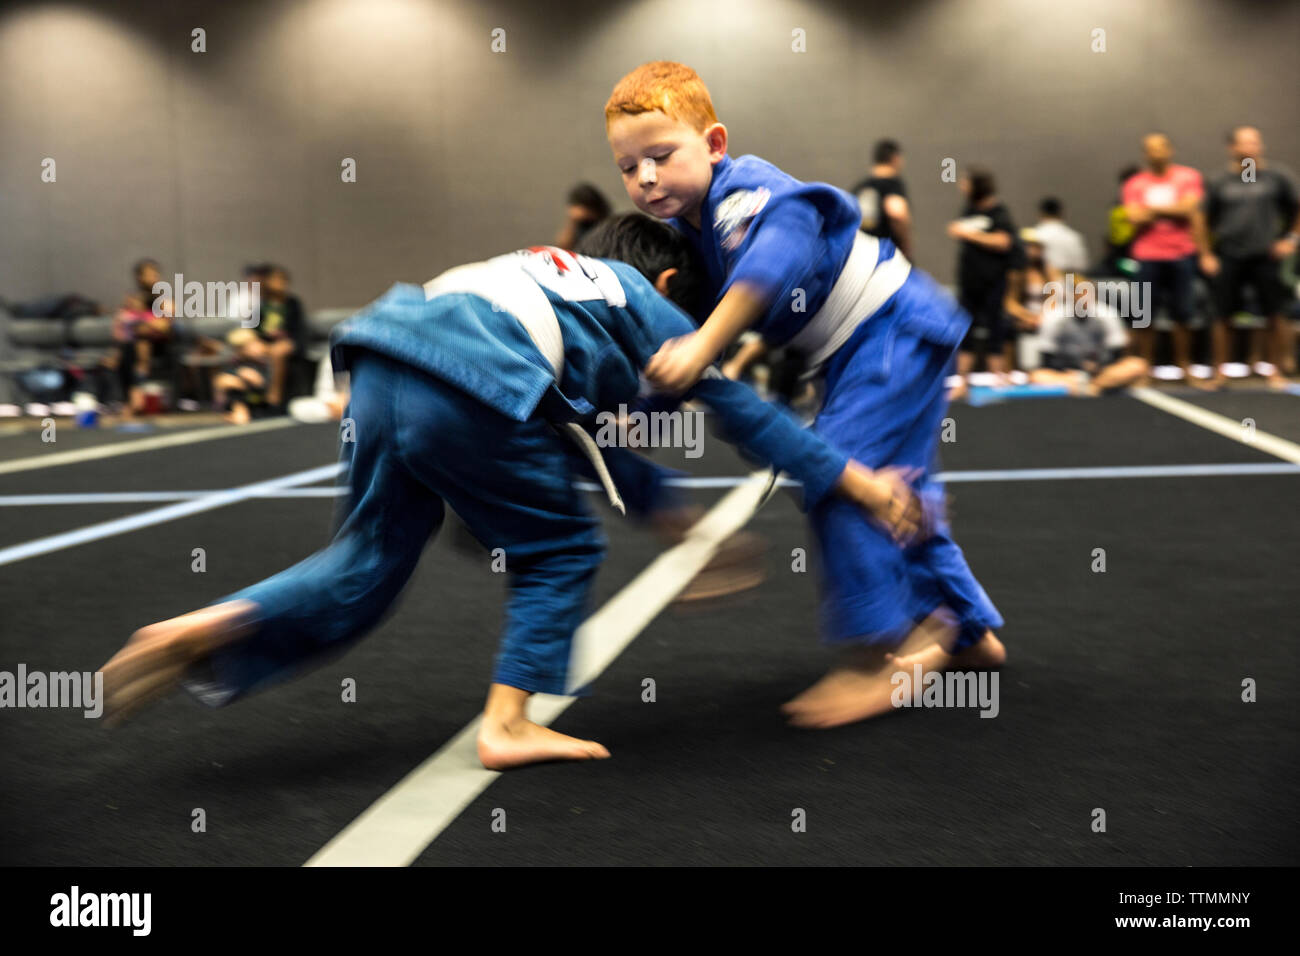 USA, Oahu, Hawaii, young boy Jujitsu Martial Arts fighters grapple at  the ICON grappling tournament in Honolulu Stock Photo